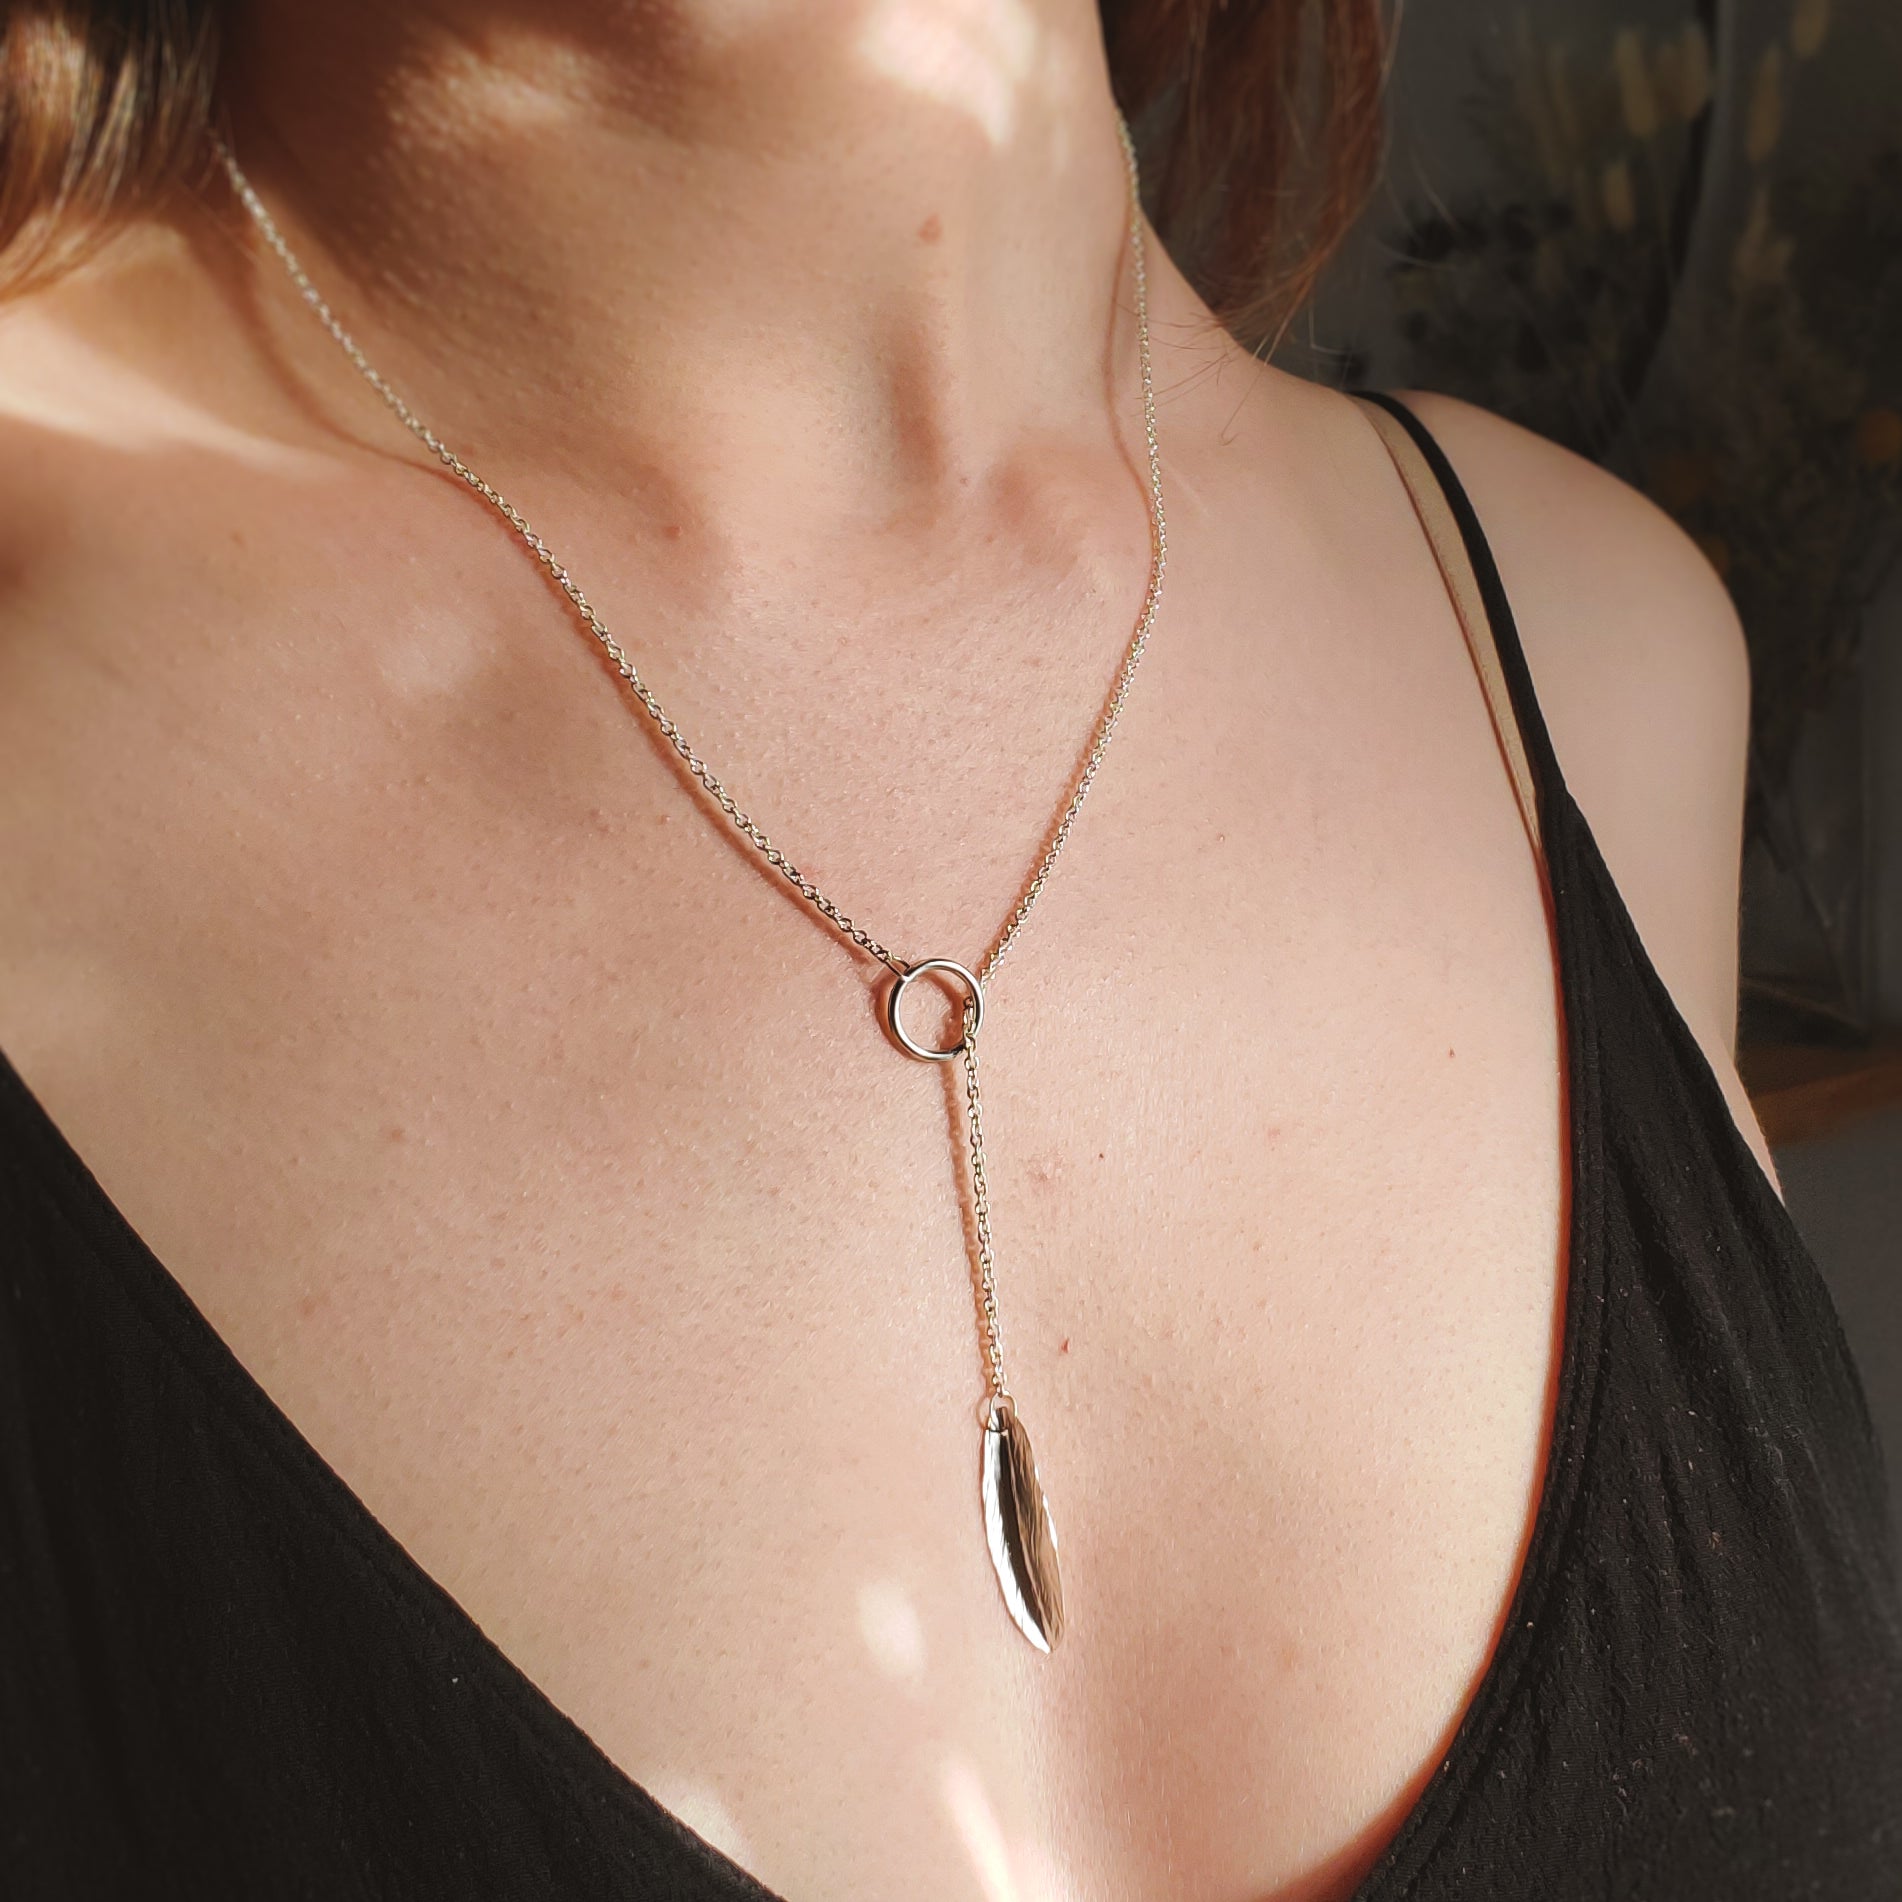 How to wear a lariat necklace?